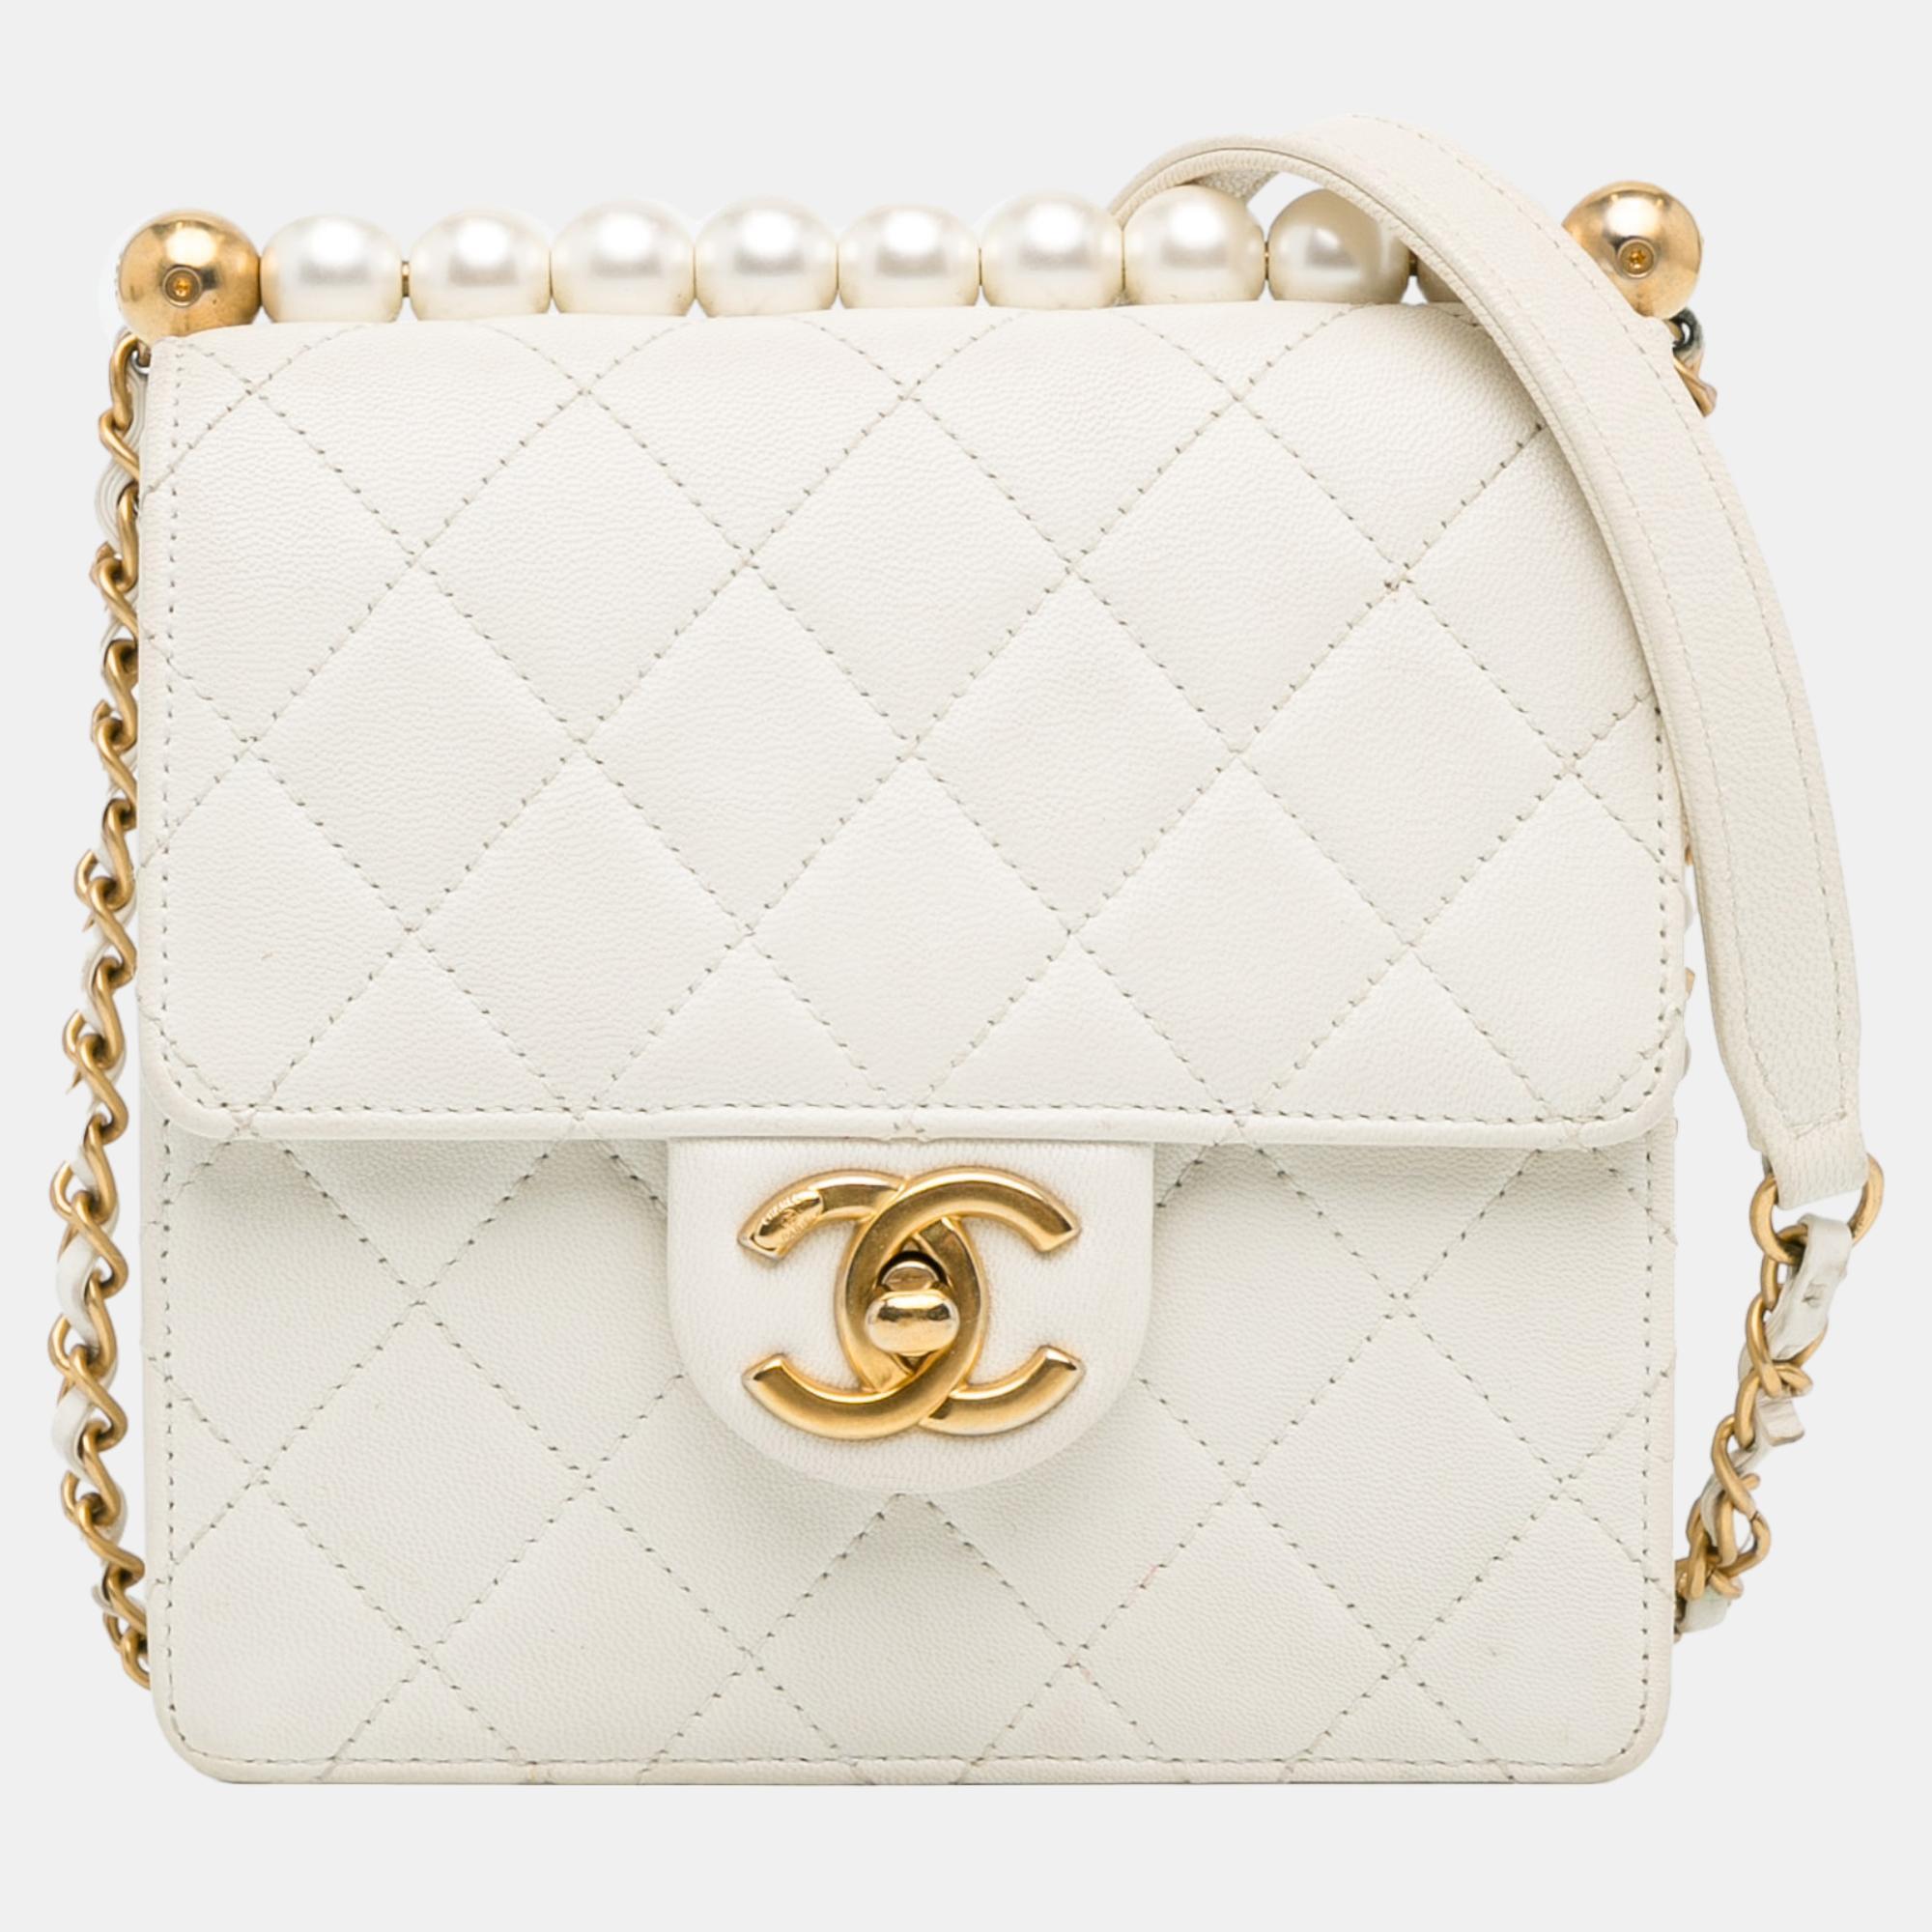 Chanel white small lambskin chic pearls flap